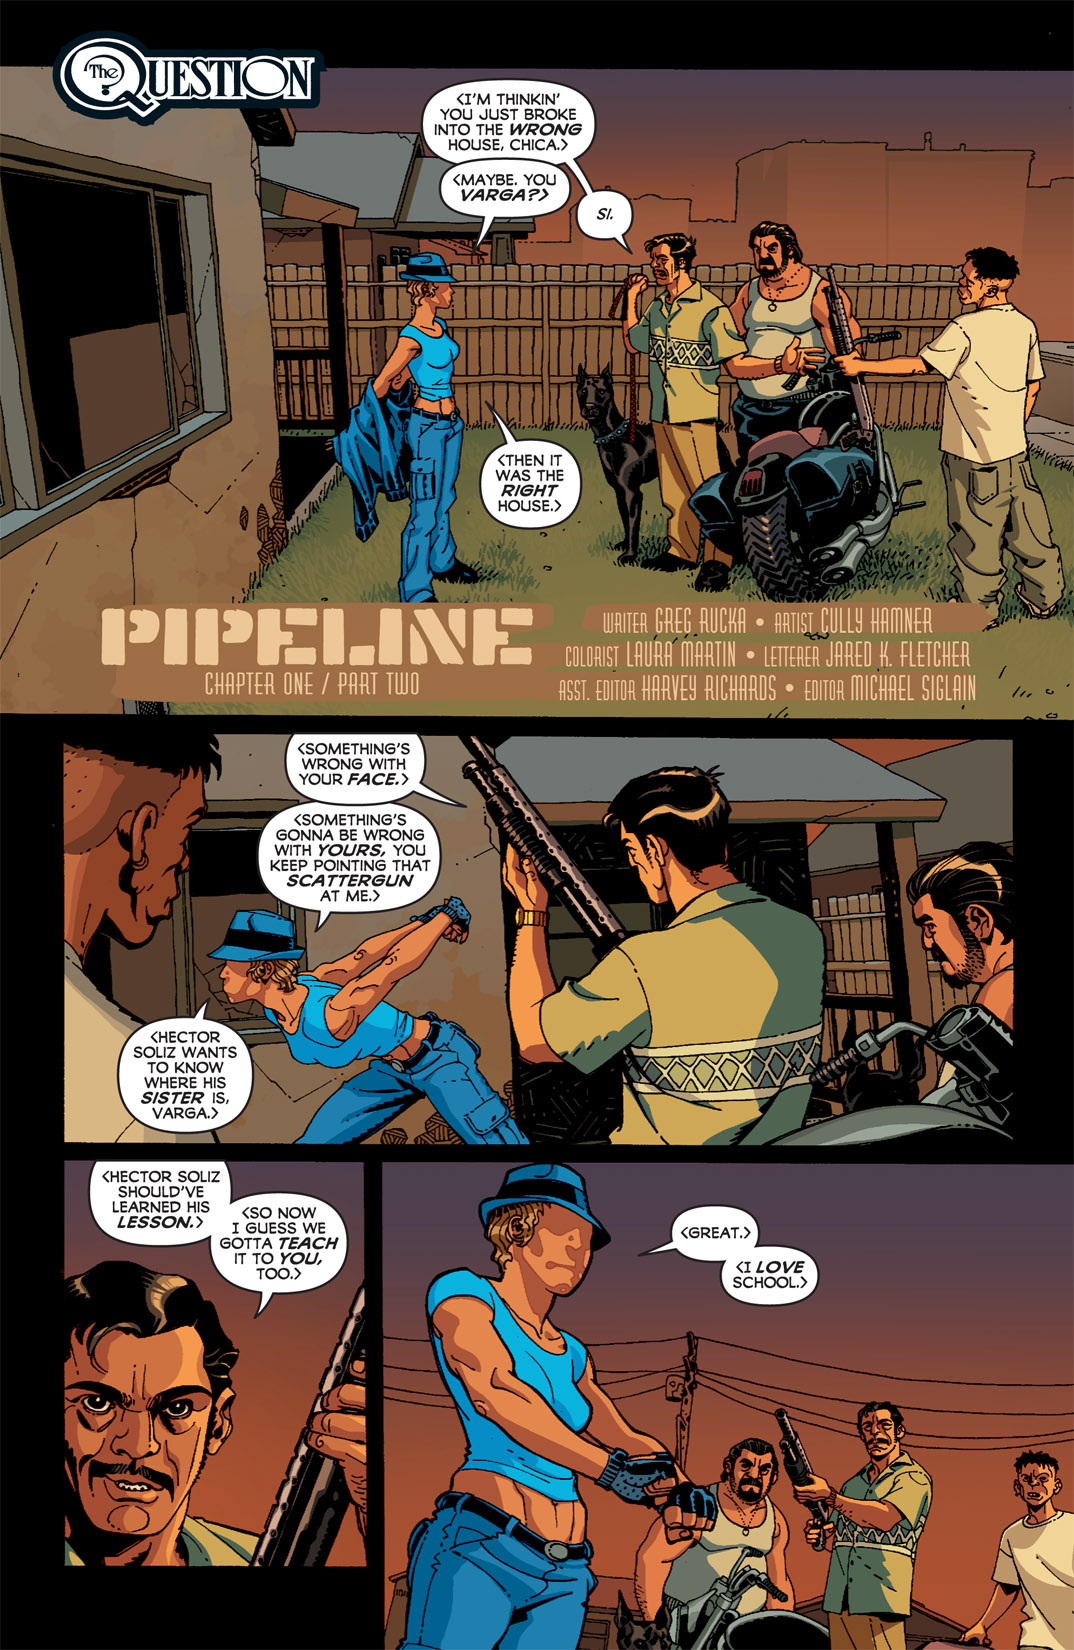 Read online The Question: Pipeline comic -  Issue # TPB - 10